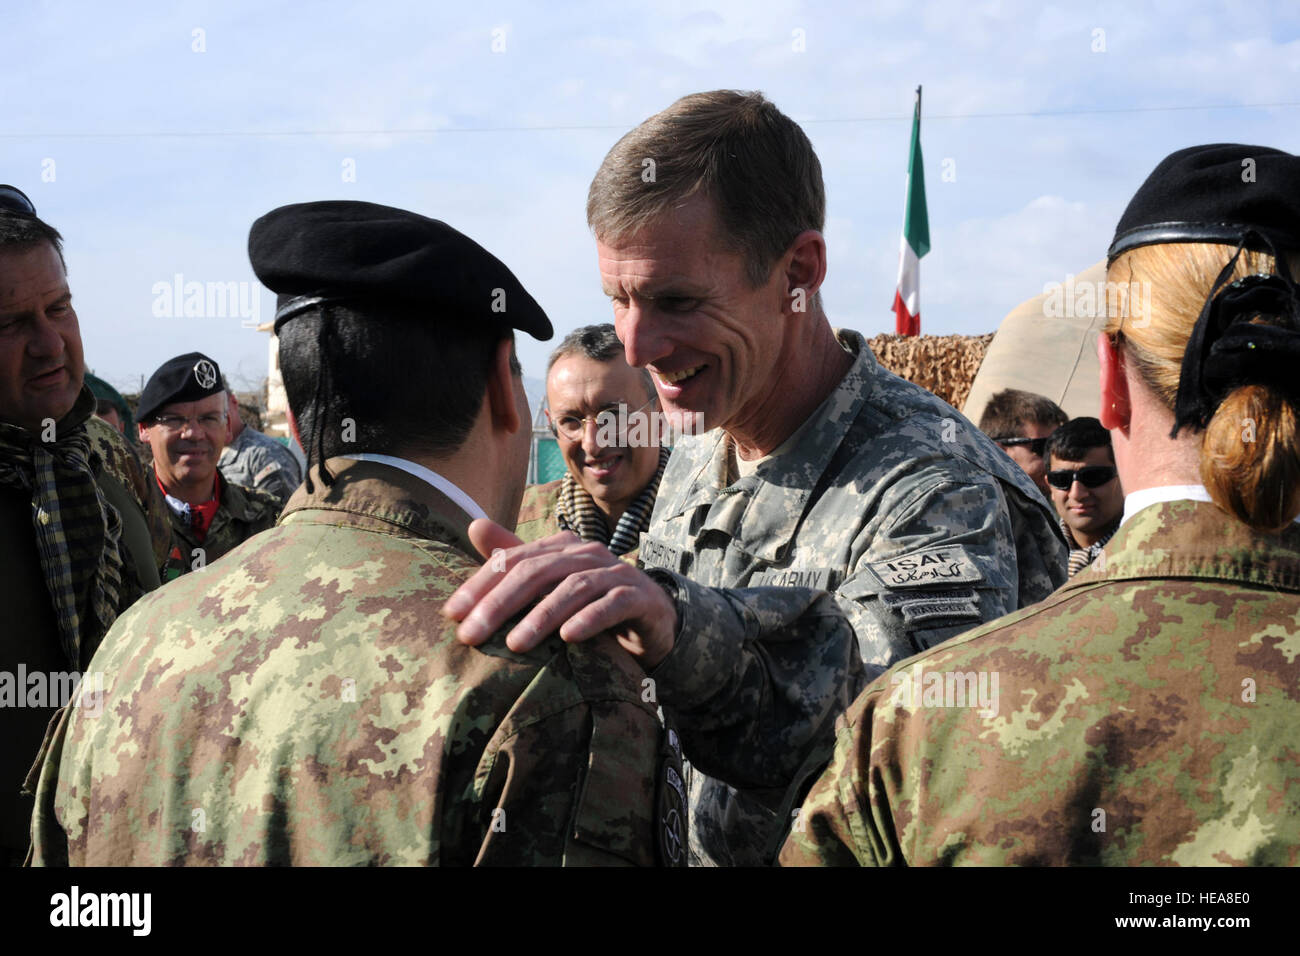 During his visit to Regional Command West (RC-West), International Security Assistance Force (ISAF) Commander Gen. Stanley McChrystal laughs with Warrant Officer Mura Gianpaolo, a member of Italian Task Force South stationed at Forward Operating Base (FOB) Farah, Afghanistan, Jan. 22, 2010. Gen. McChrystal visited several bases and outposts in RC-West to speak with ISAF leaders and representatives of the provincial government, including Farah Provincial Governor Rahool Amin. Stock Photo